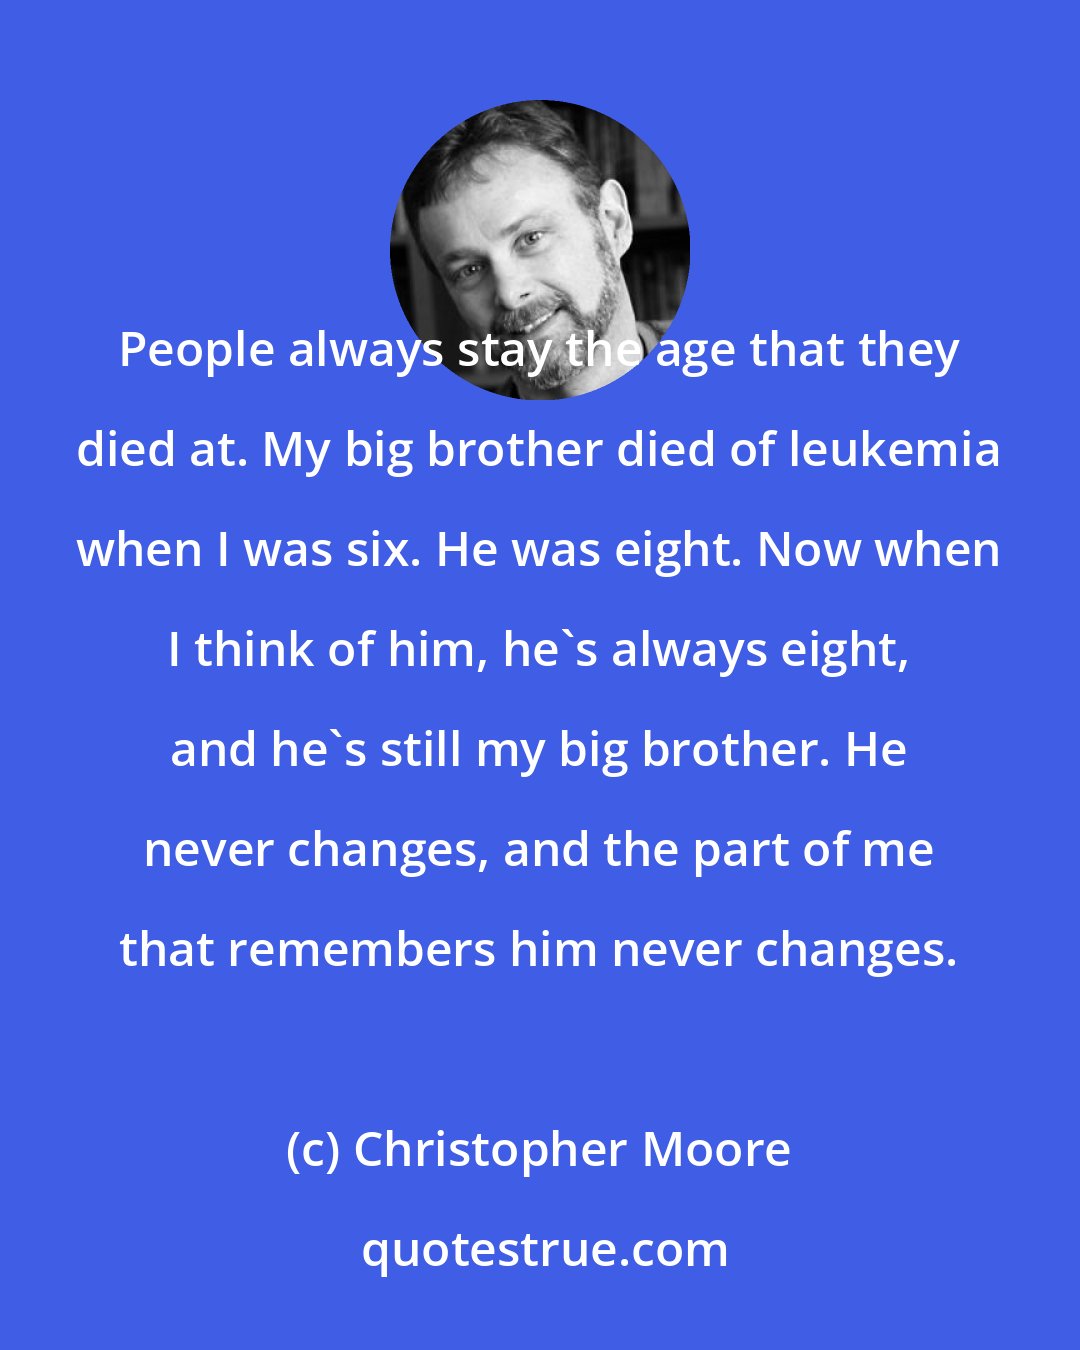 Christopher Moore: People always stay the age that they died at. My big brother died of leukemia when I was six. He was eight. Now when I think of him, he's always eight, and he's still my big brother. He never changes, and the part of me that remembers him never changes.